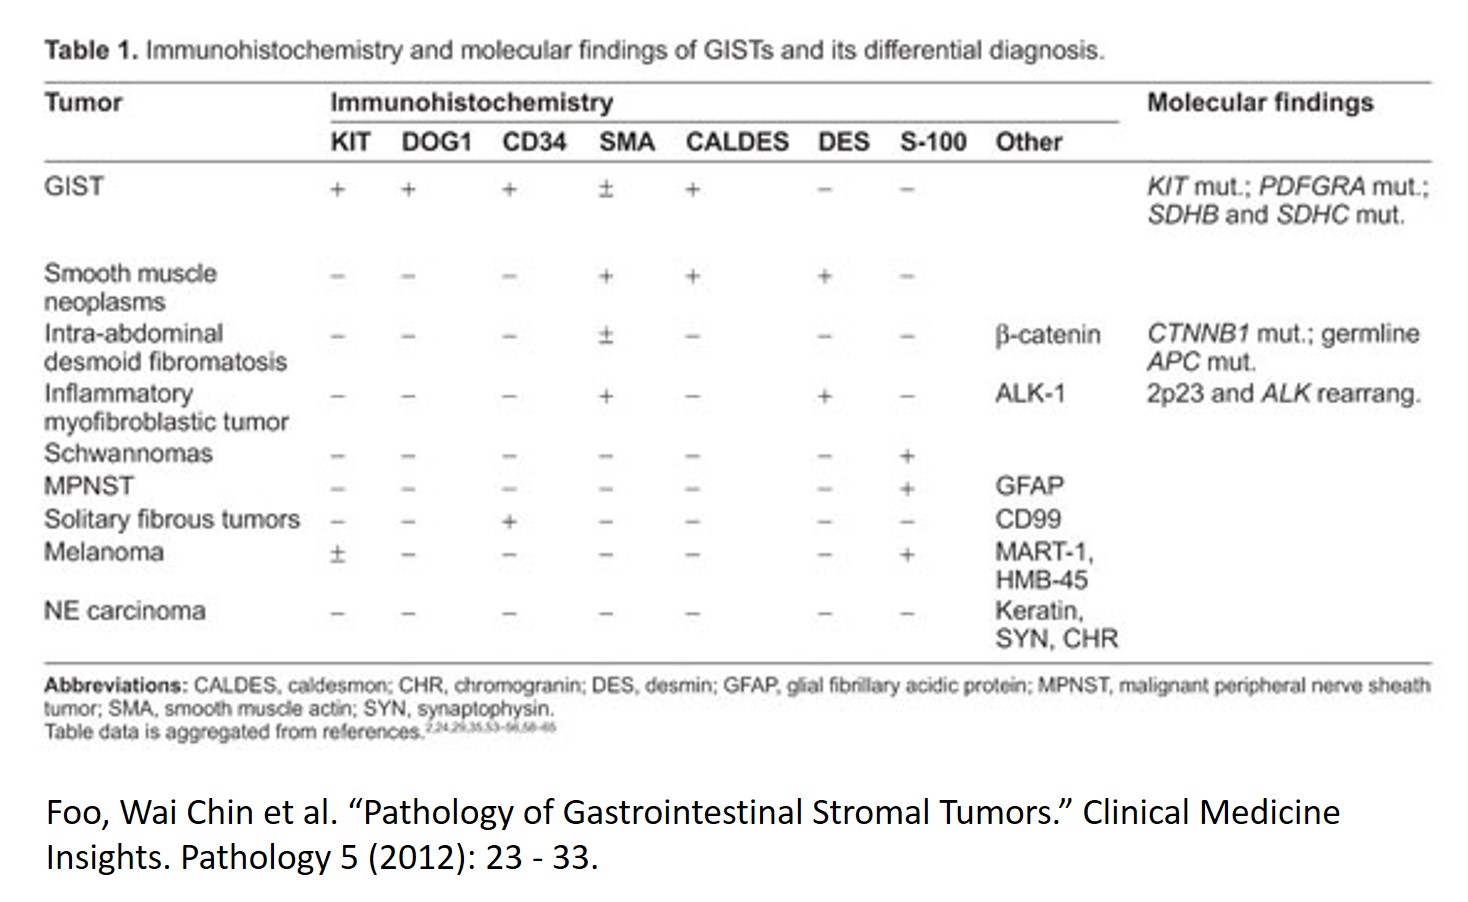 Table depicting GIST IHC findings